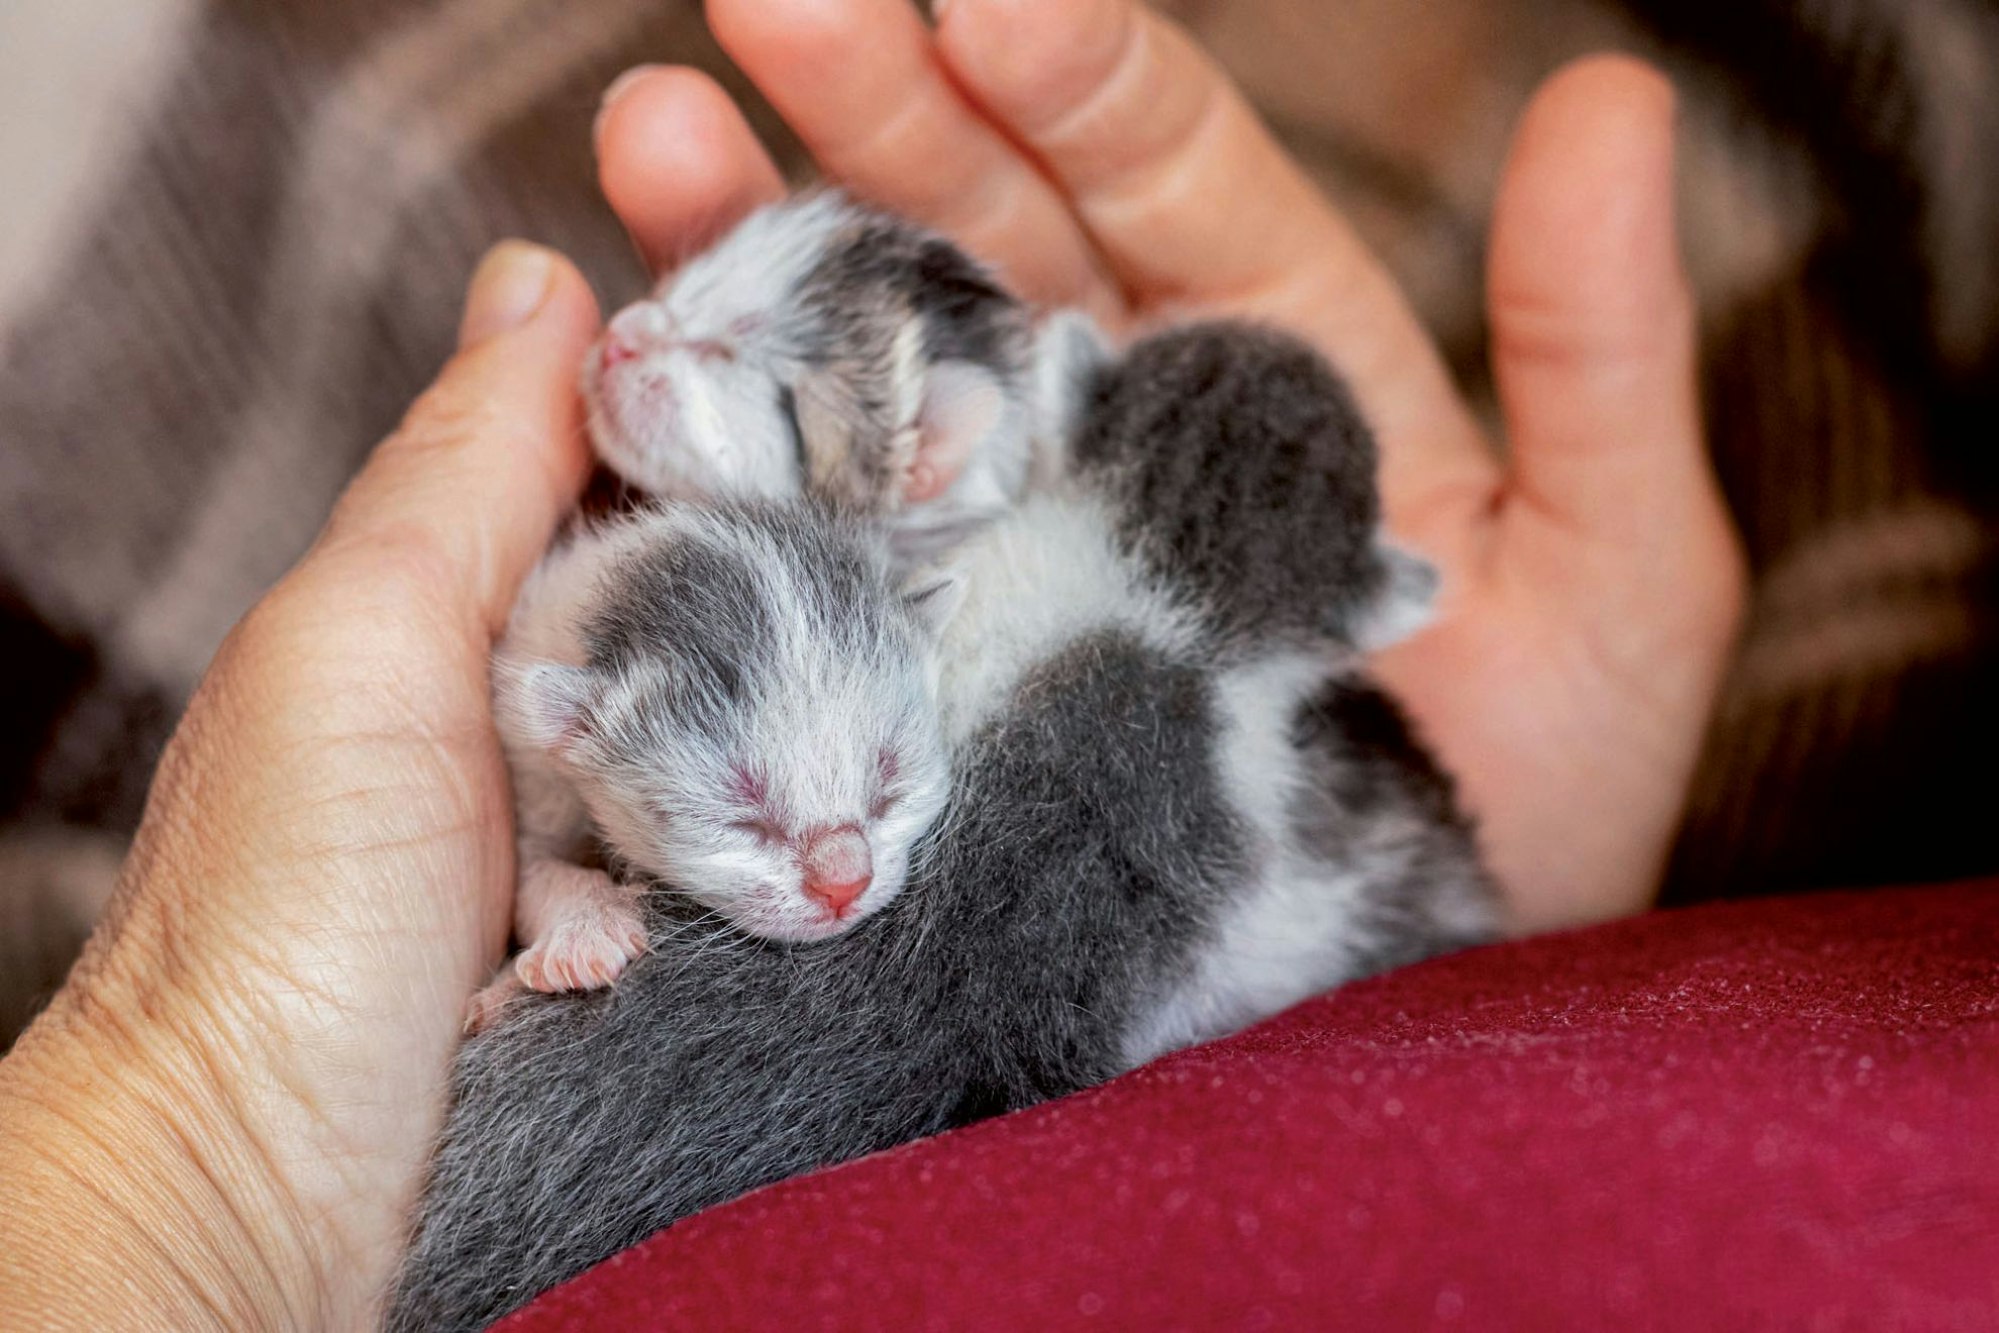 It is important that kittens have human contact prior to seven weeks of age 